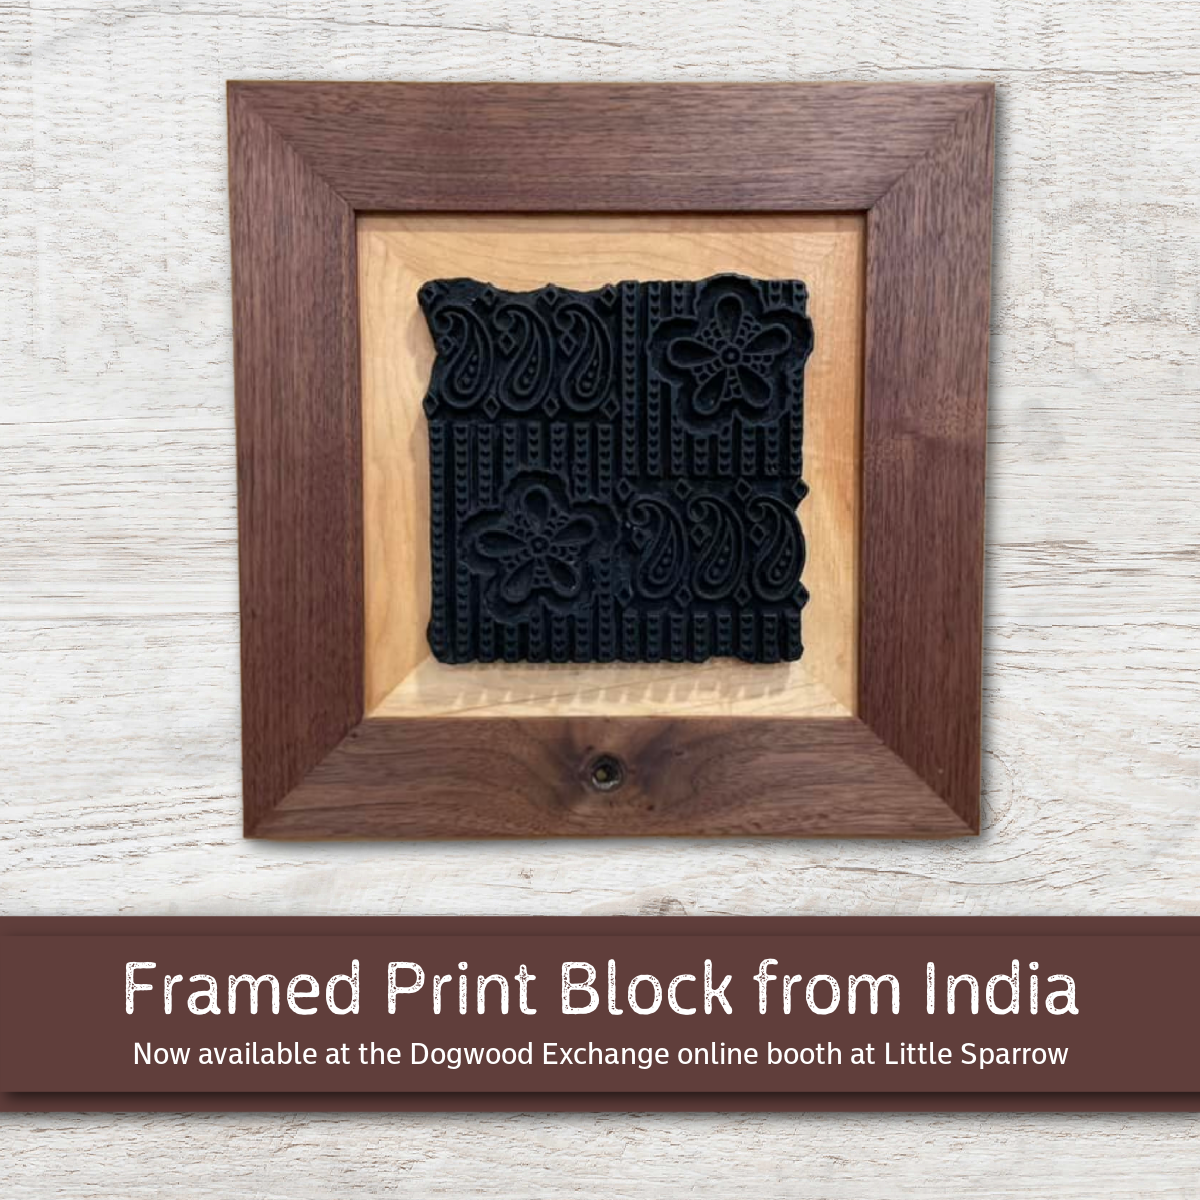 Framed Print Block from India